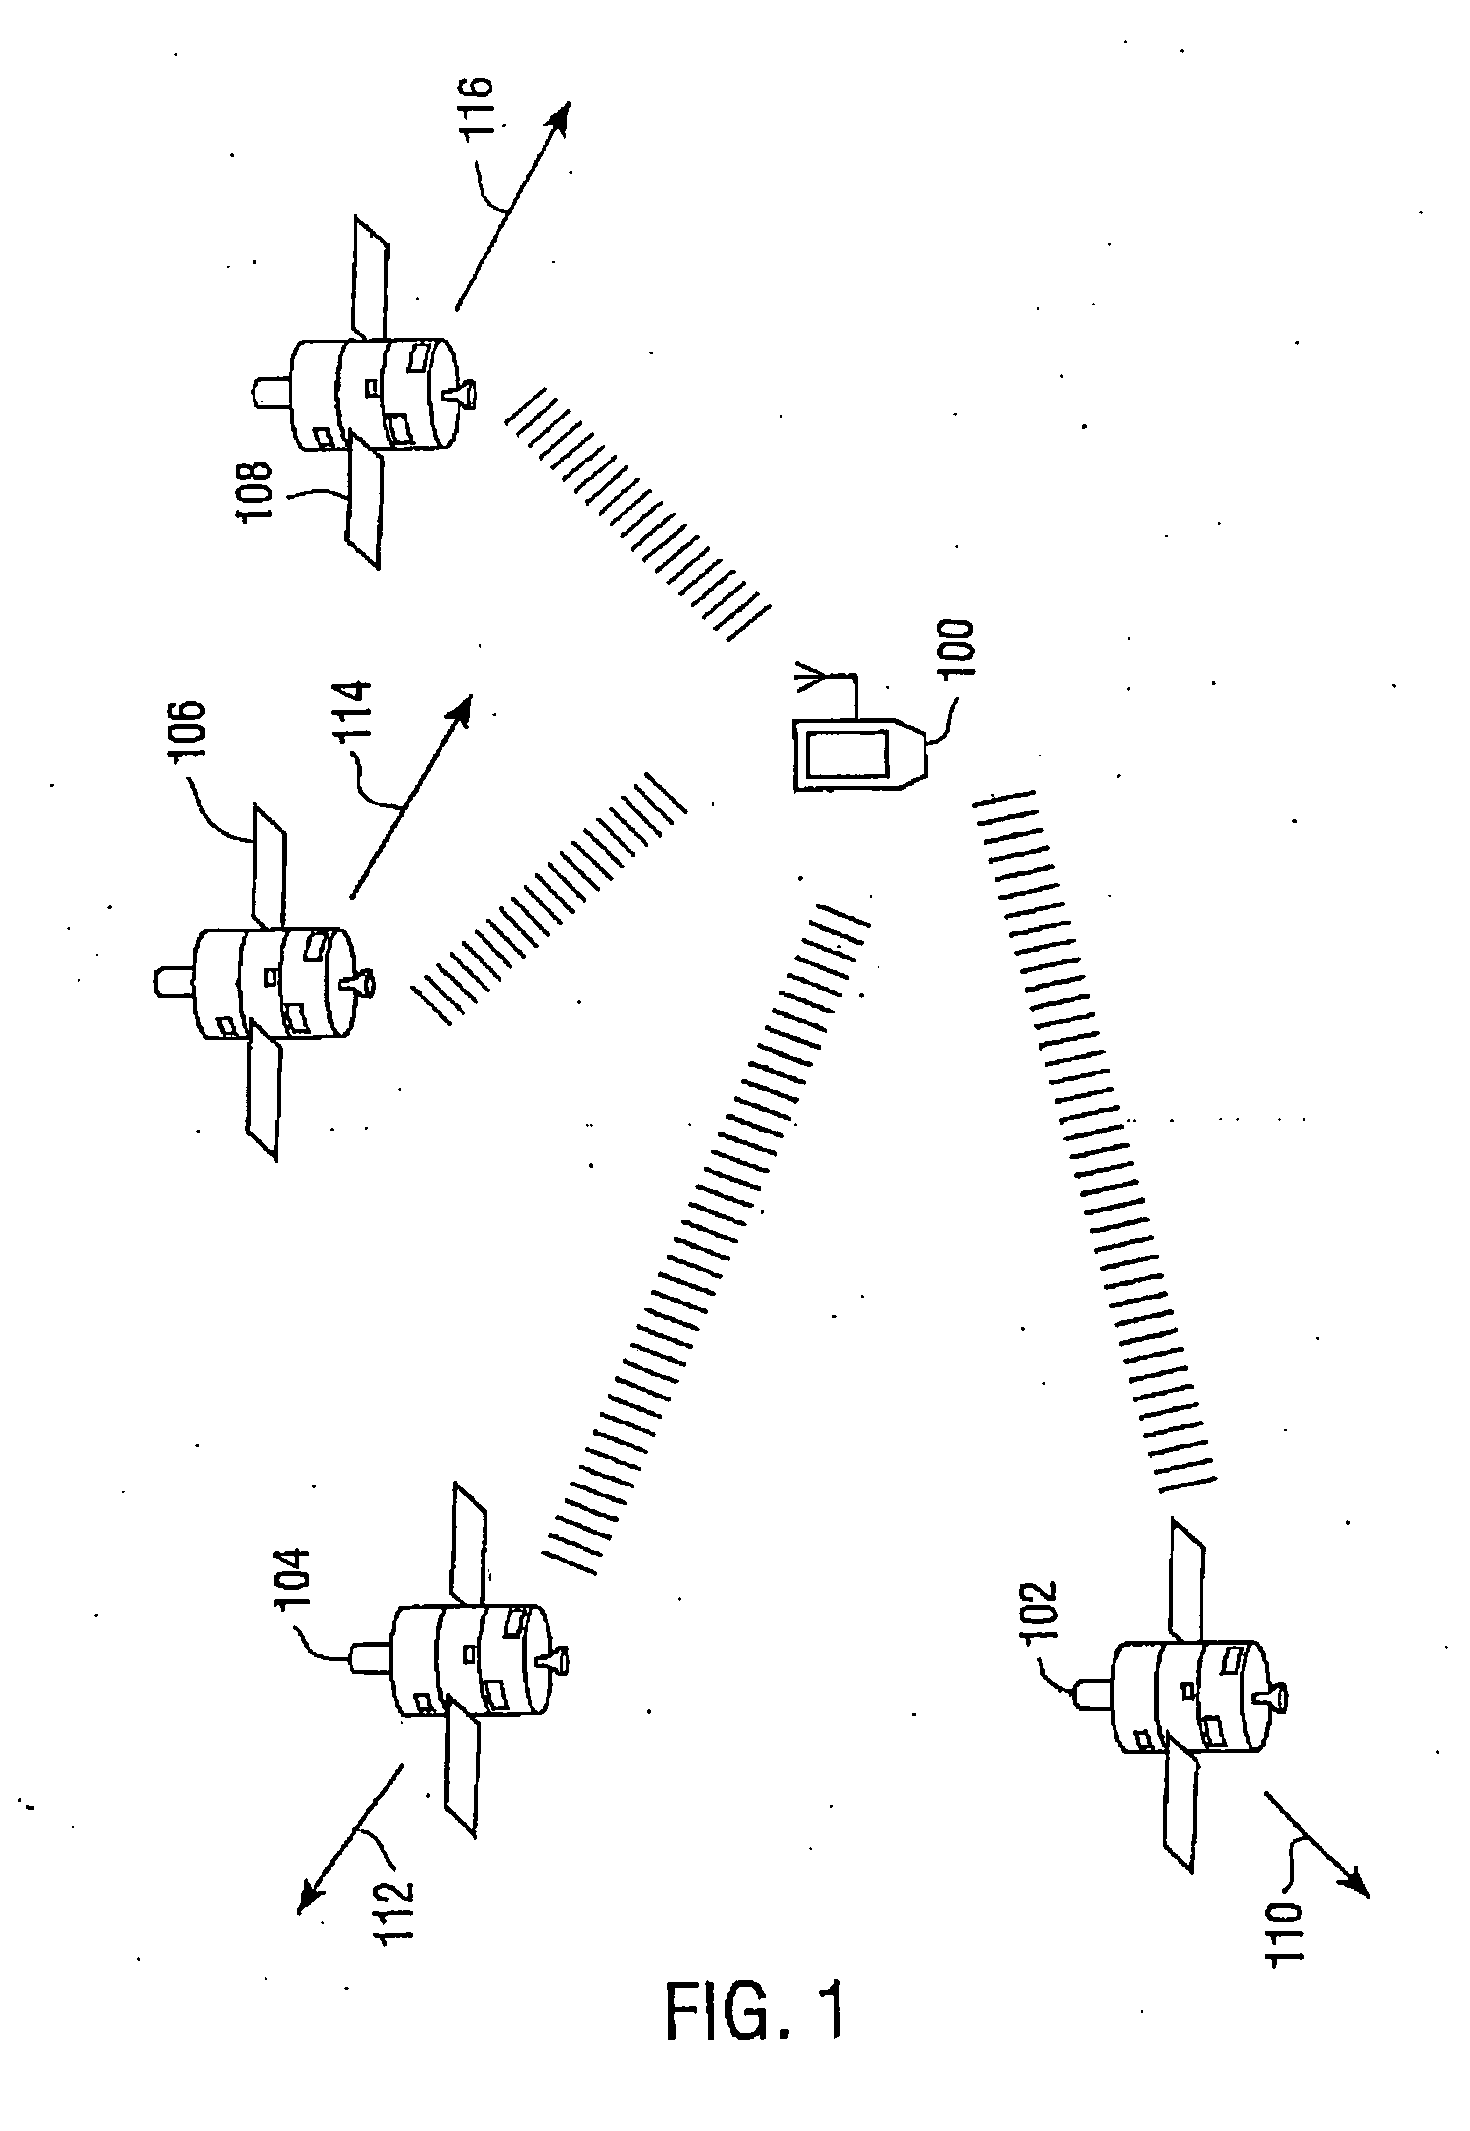 Method and apparatus for real time clock (RTC) brownout detection